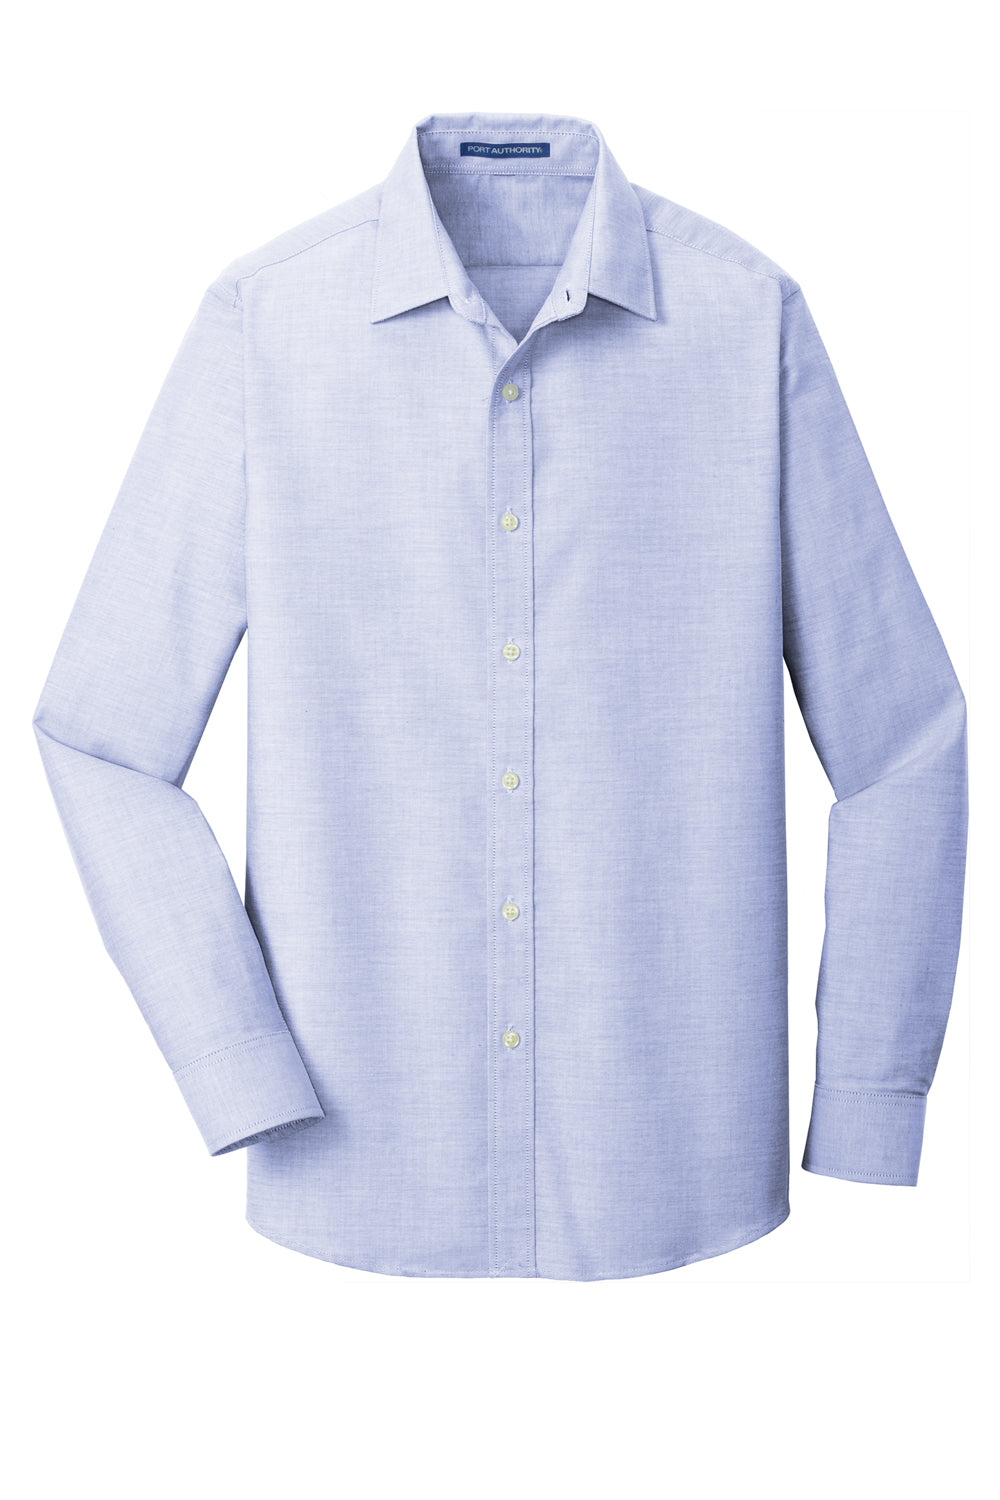 Port Authority S661 SuperPro Oxford Wrinkle Resistant Long Sleeve Button Down Shirt Oxford Blue Flat Front